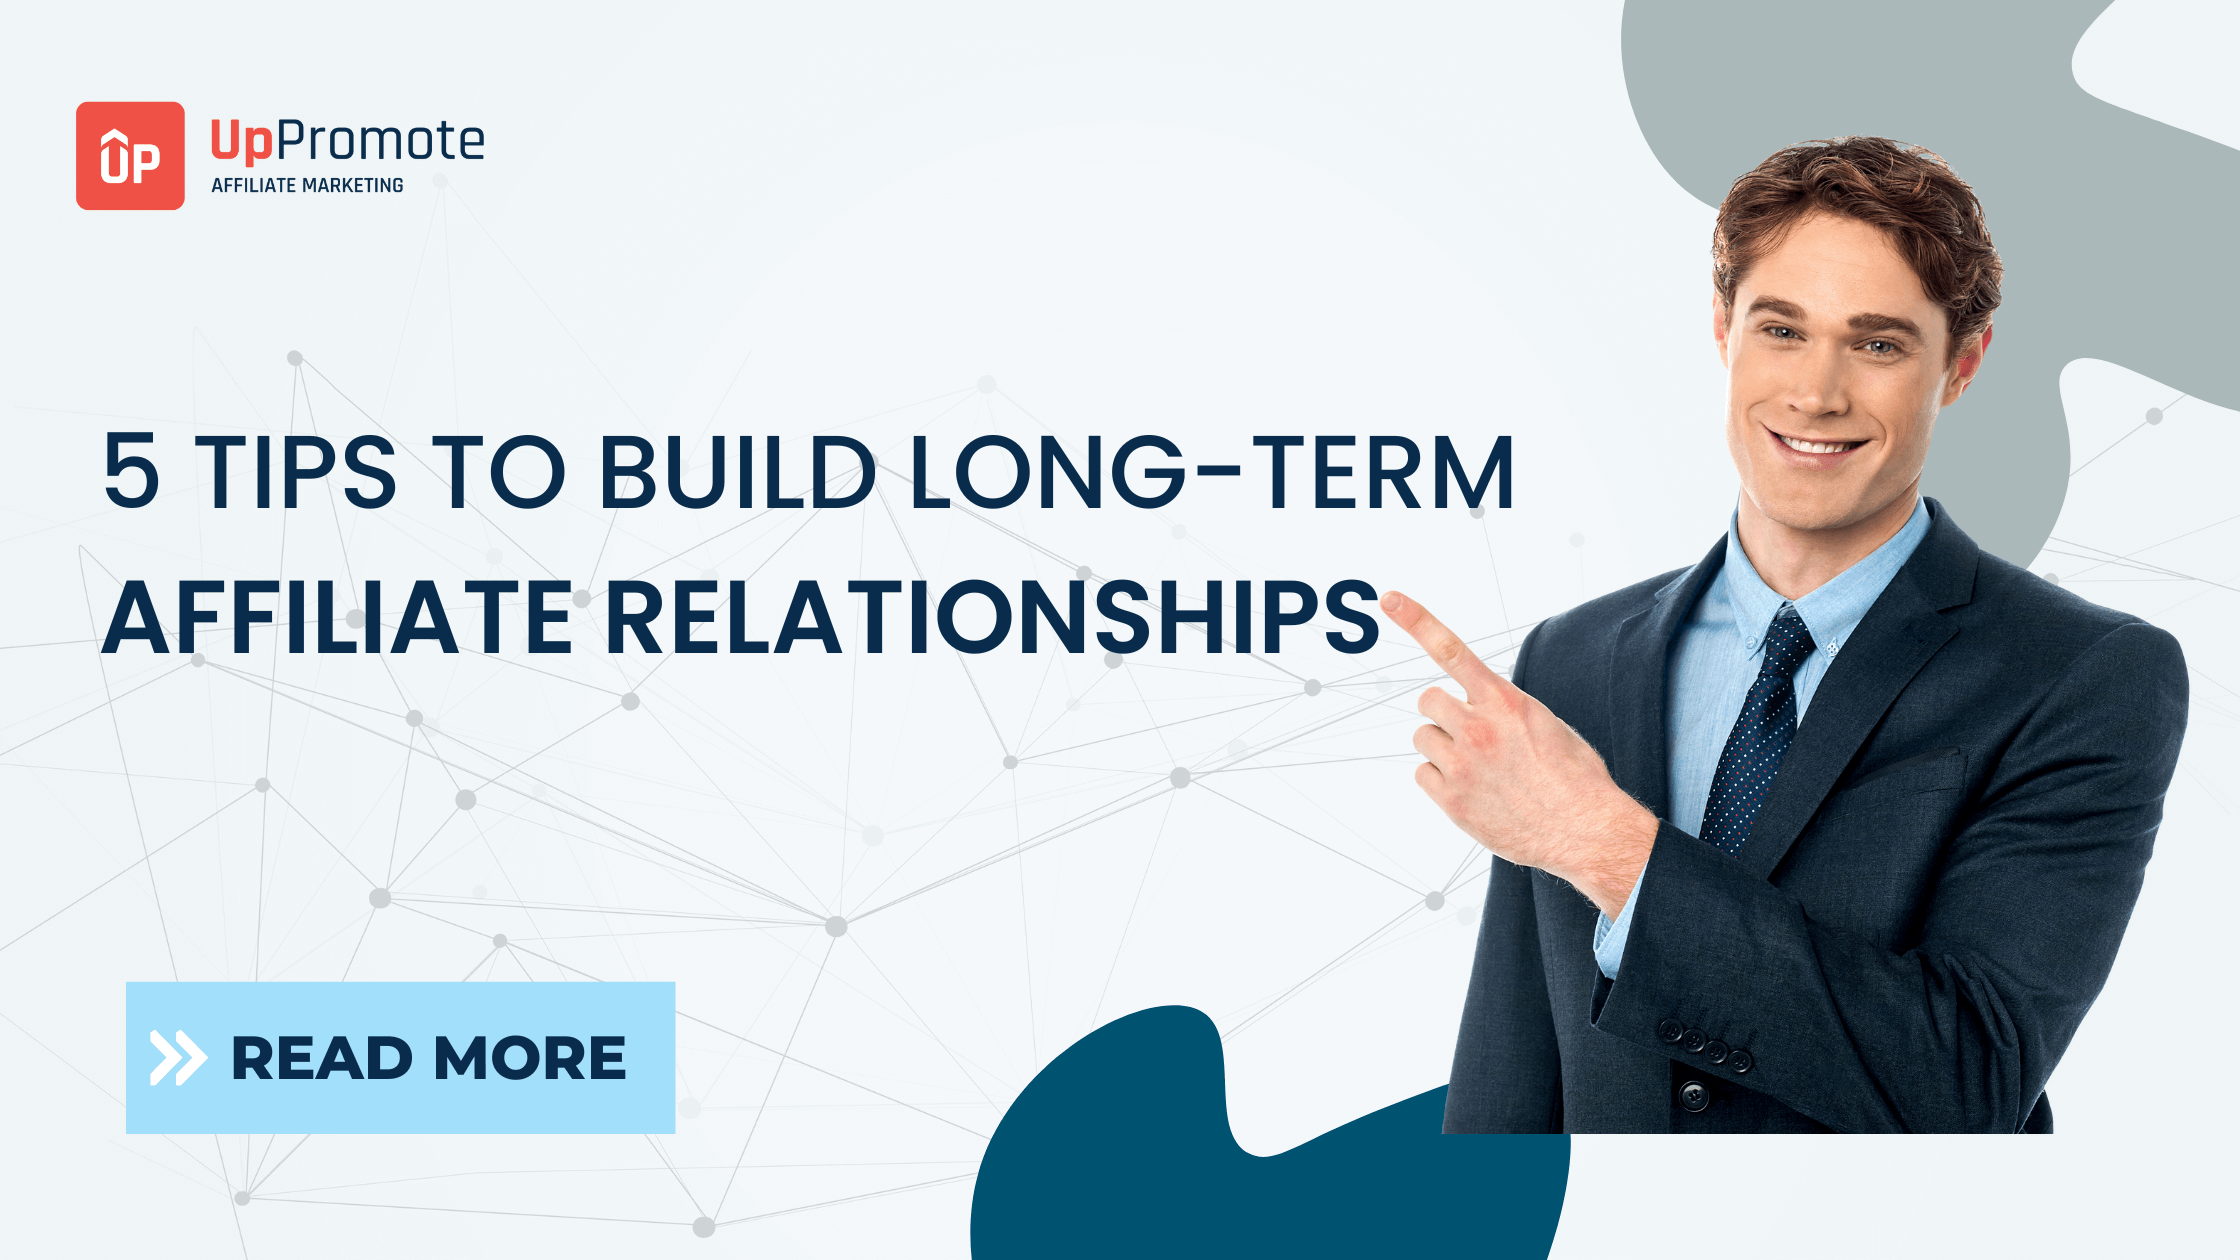 5 Tips To Build Long-Term Affiliate Relationships